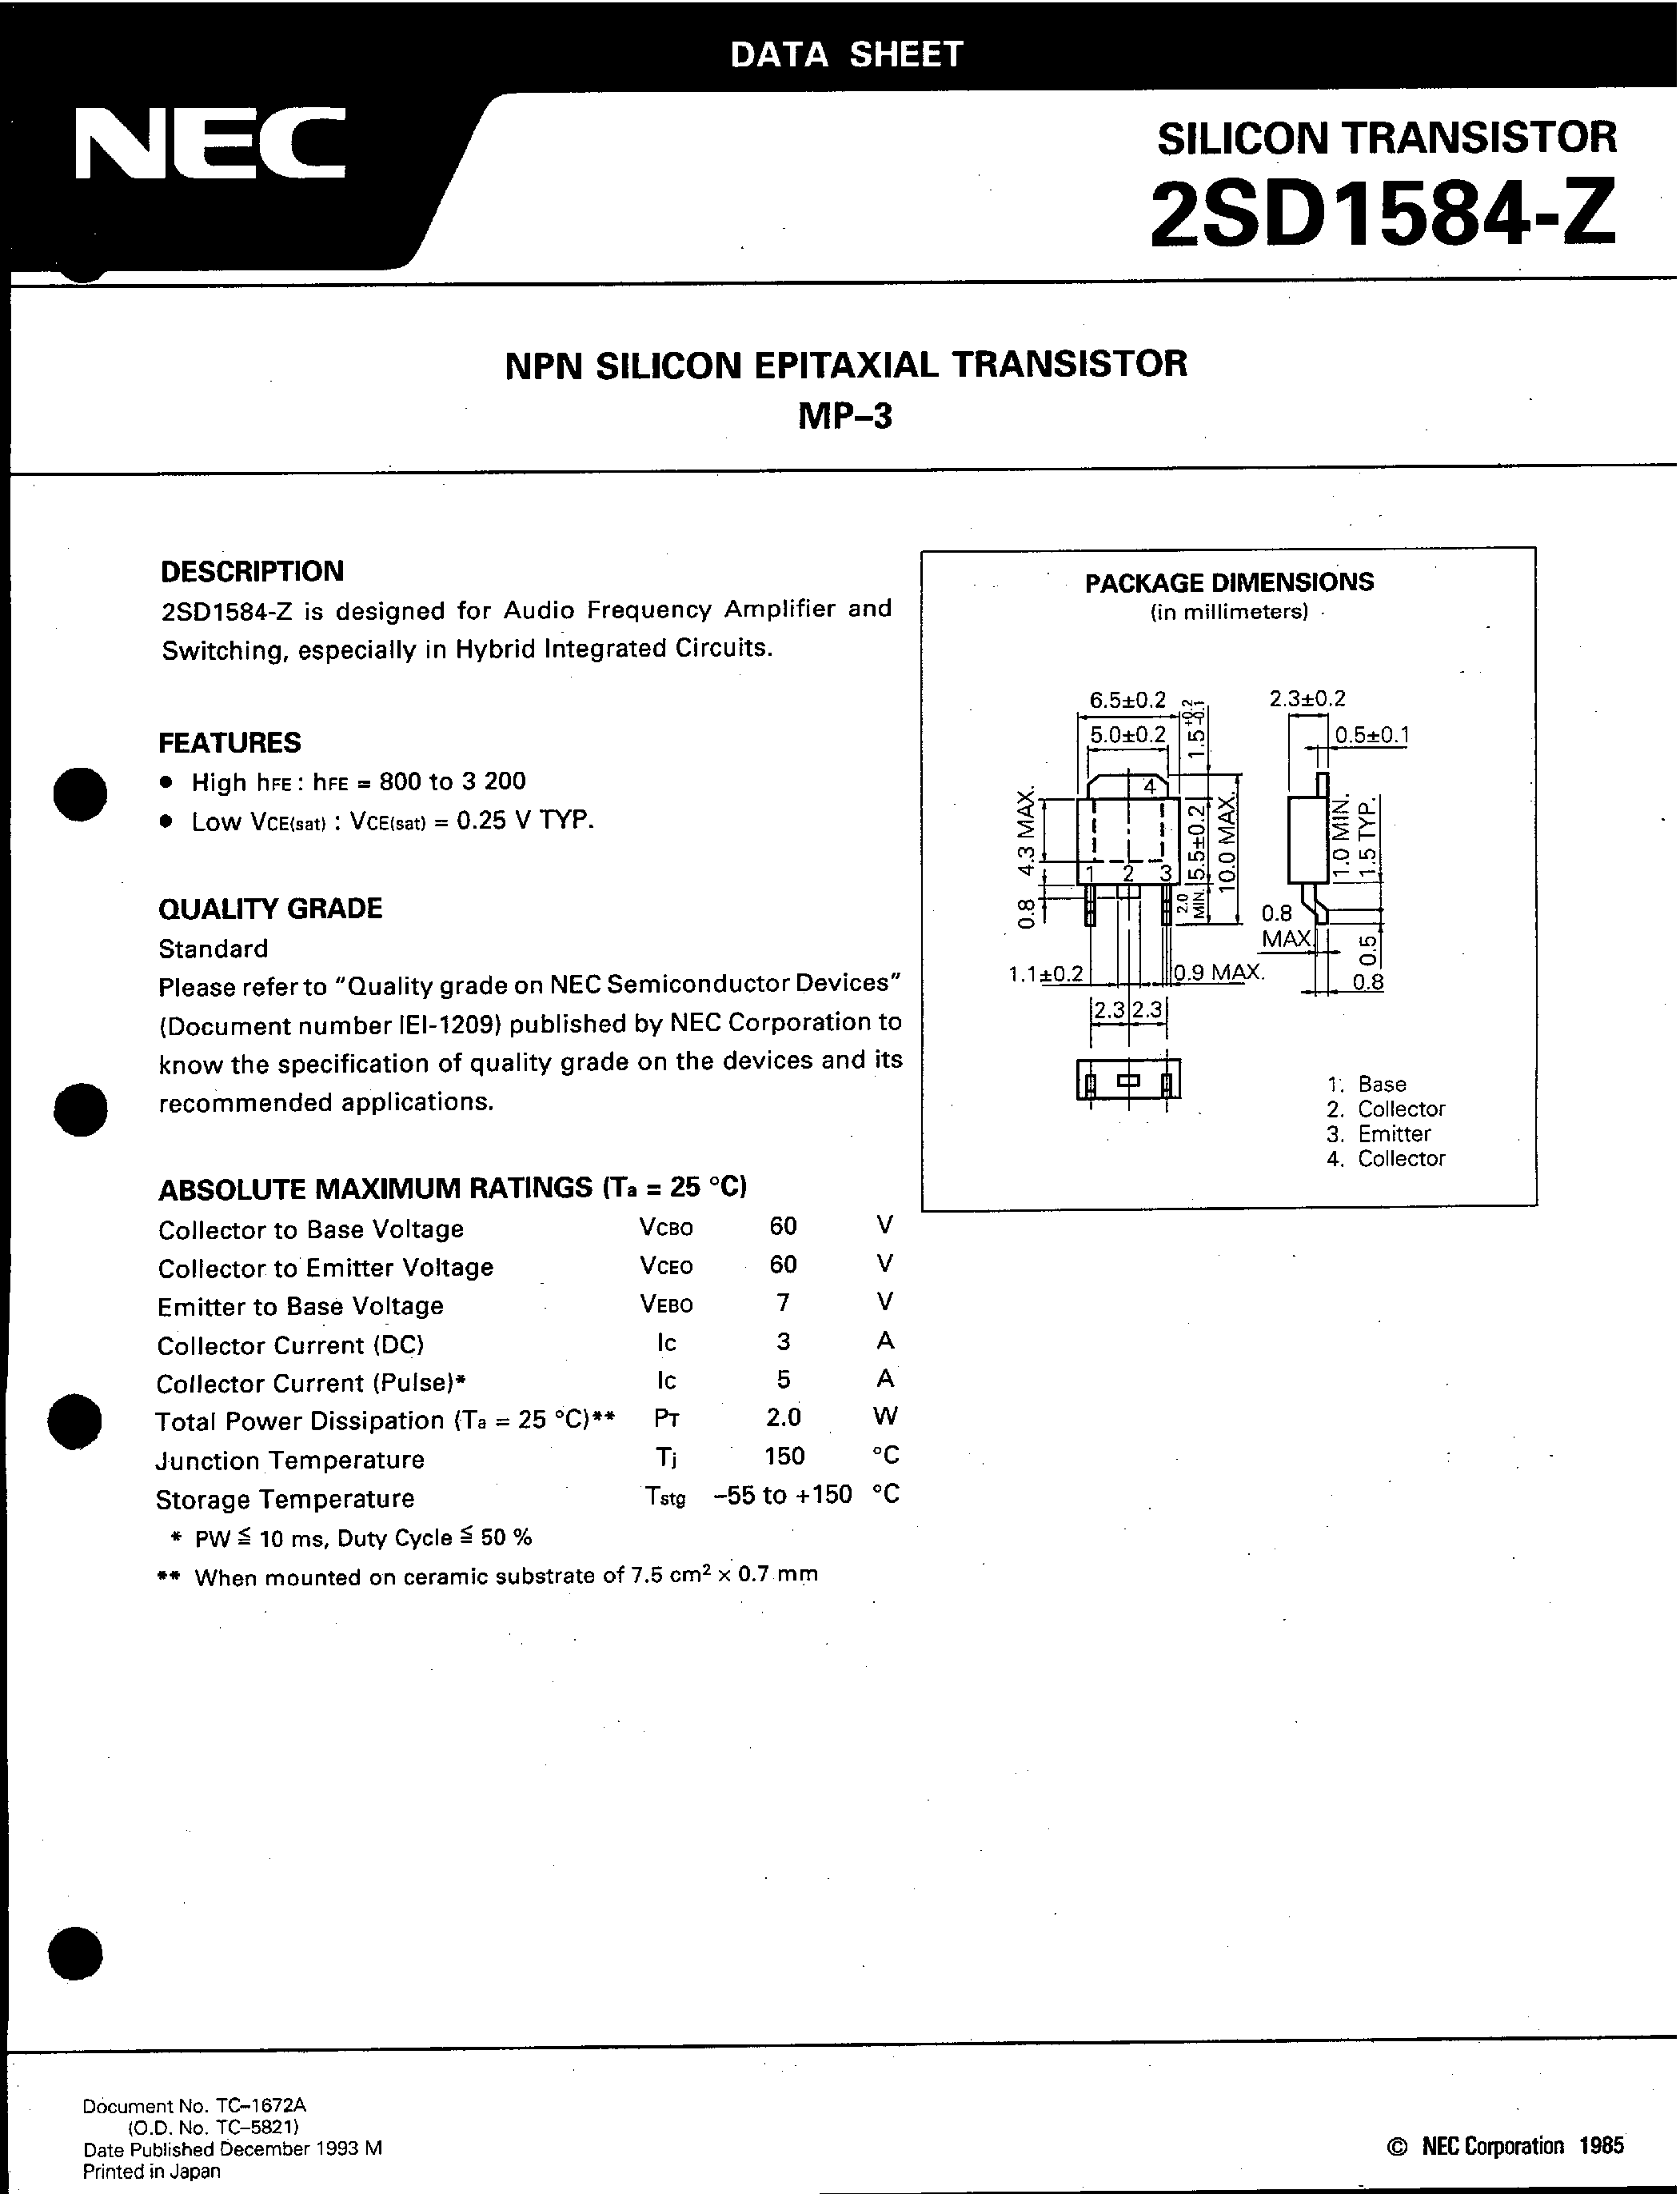 Даташит 2SD1584-Z - NPN SILICON EPITAXIAL TRANSISTOR MP-3 страница 1